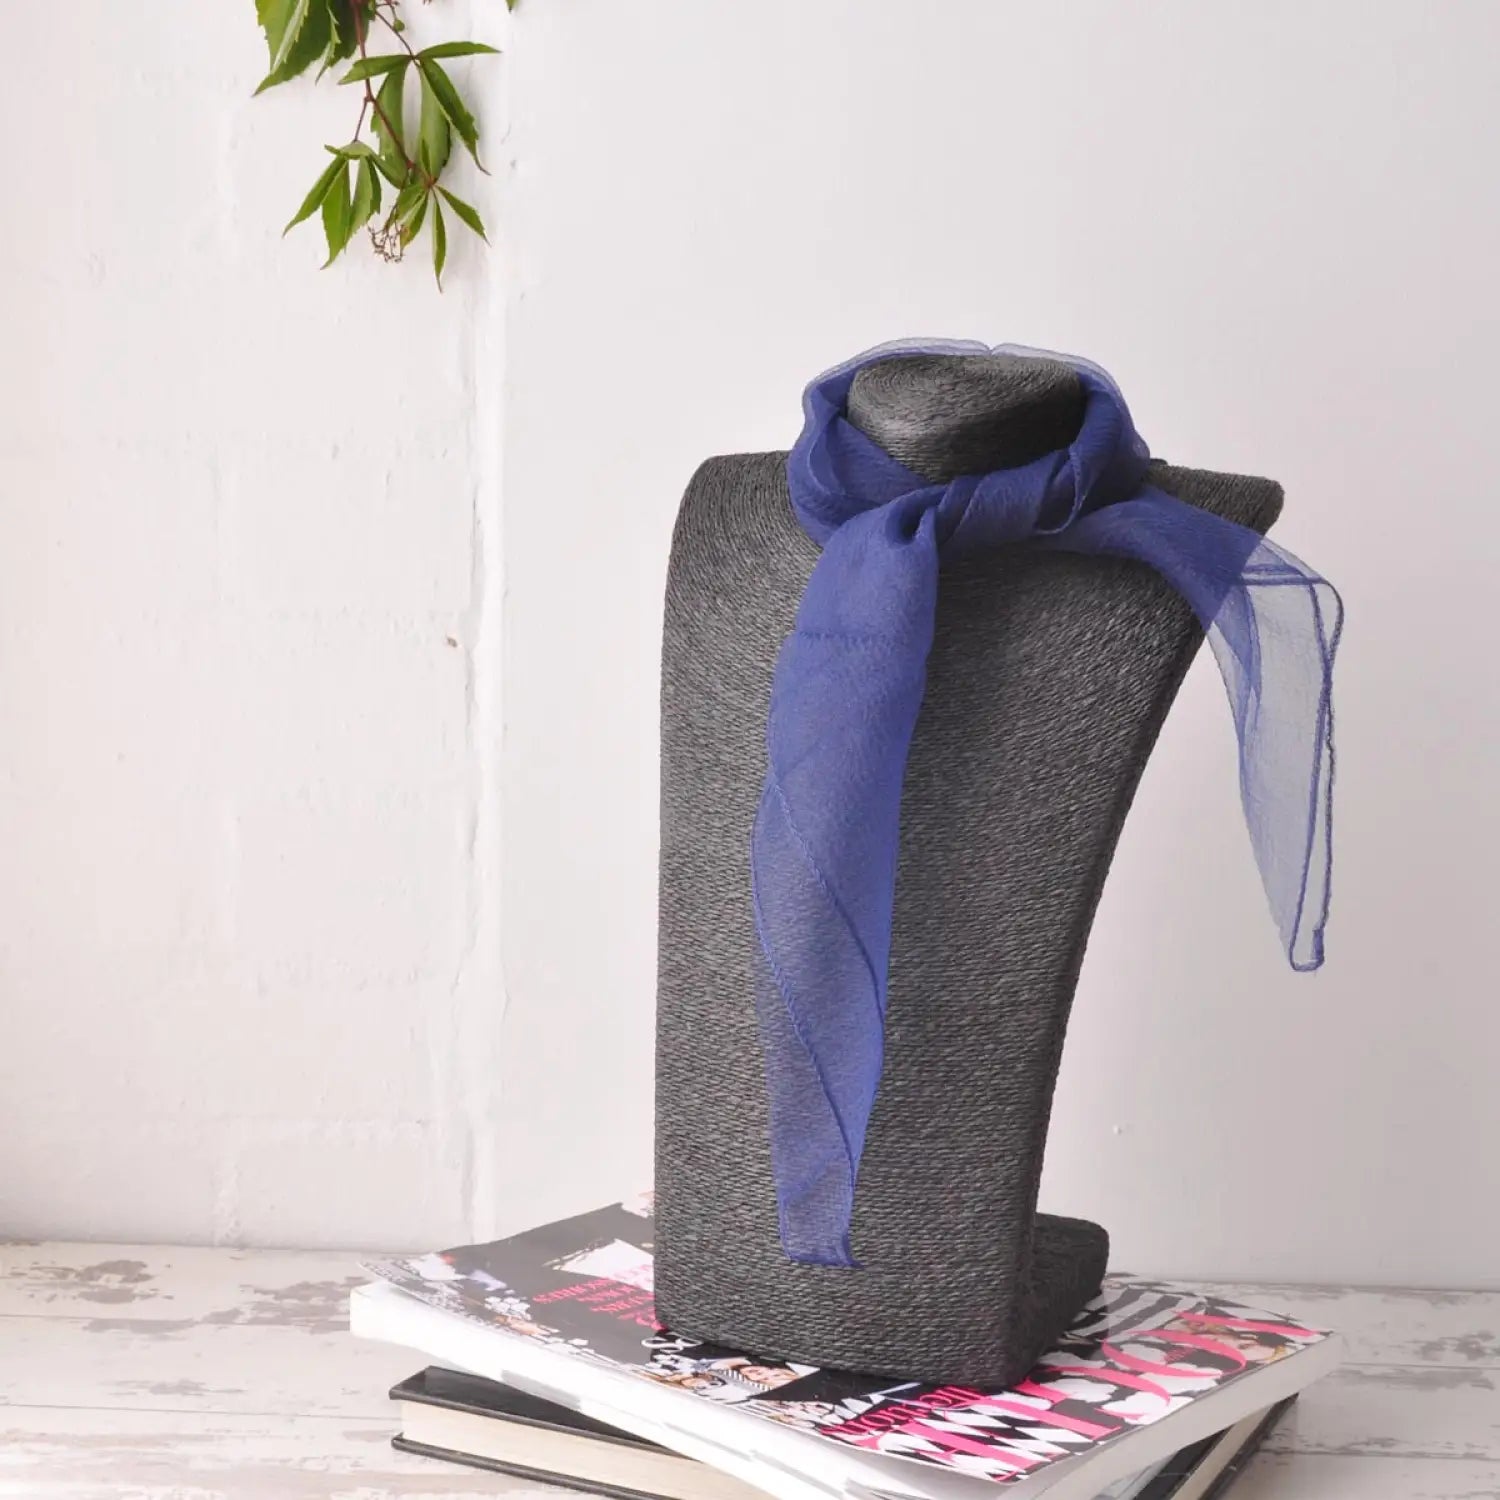 Chiffon Square Scarf in Blue on Grey Mannequin for Retro Organza Style